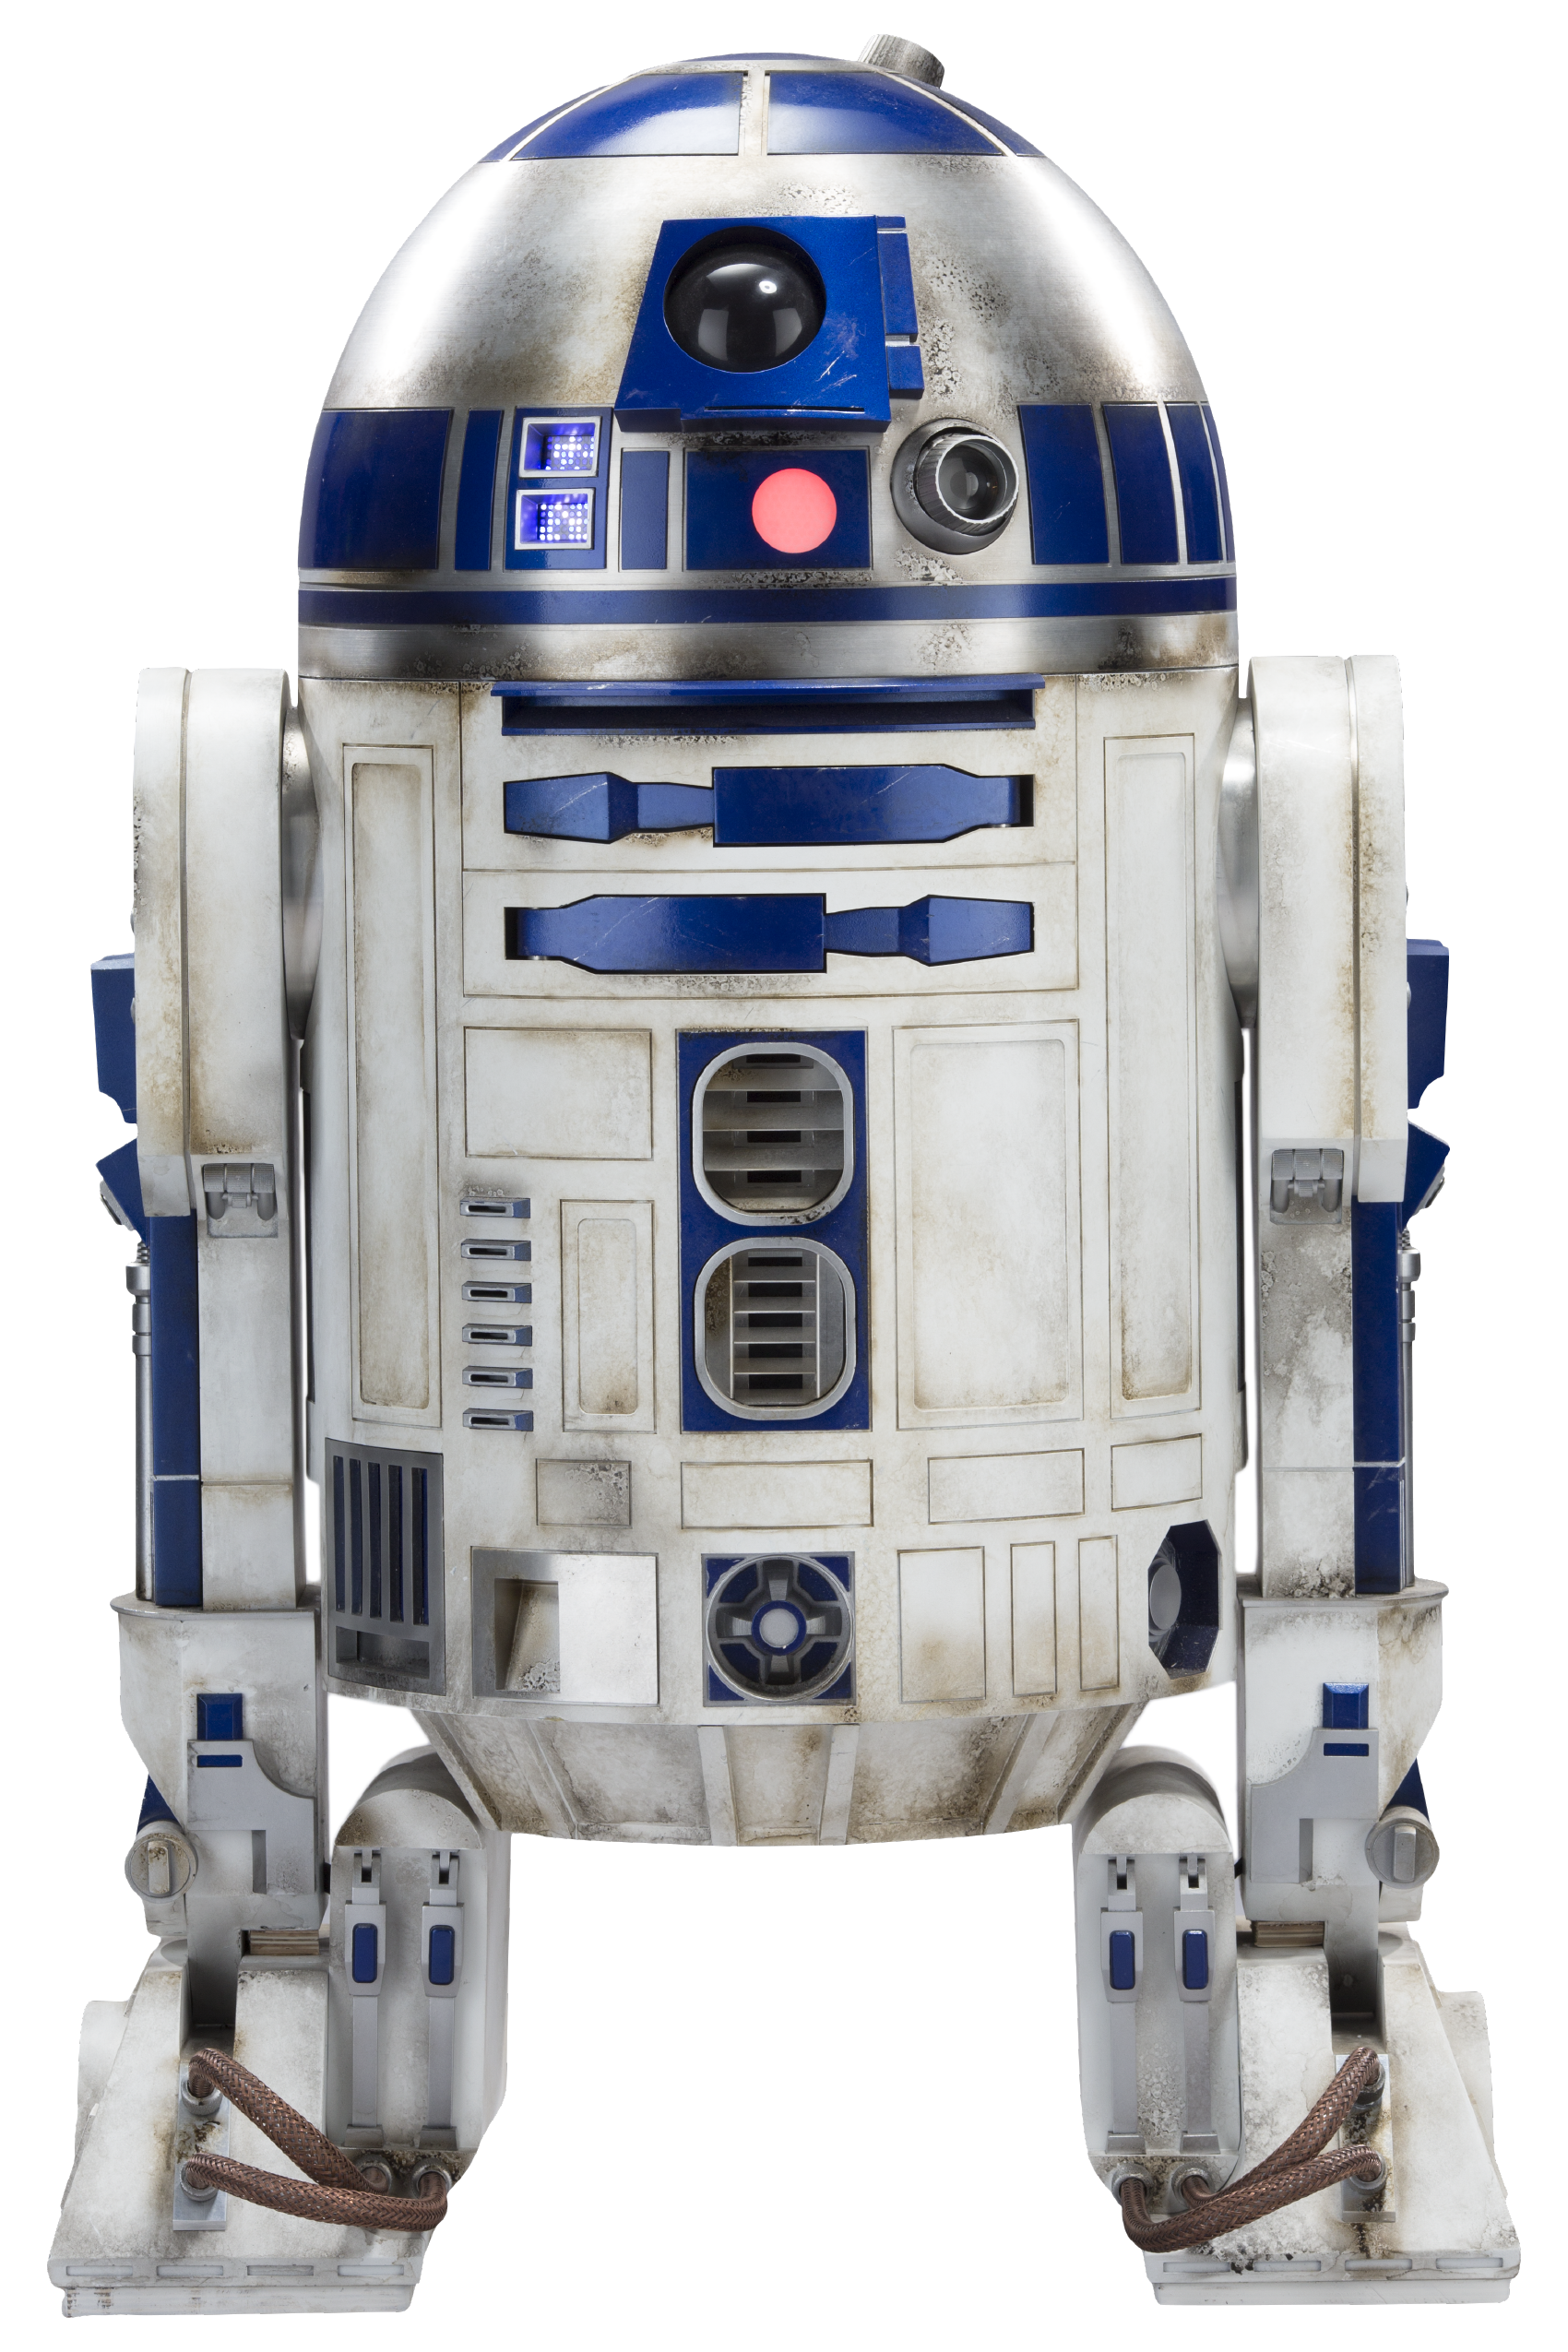 Who is R2-D2 in the Star Wars series?